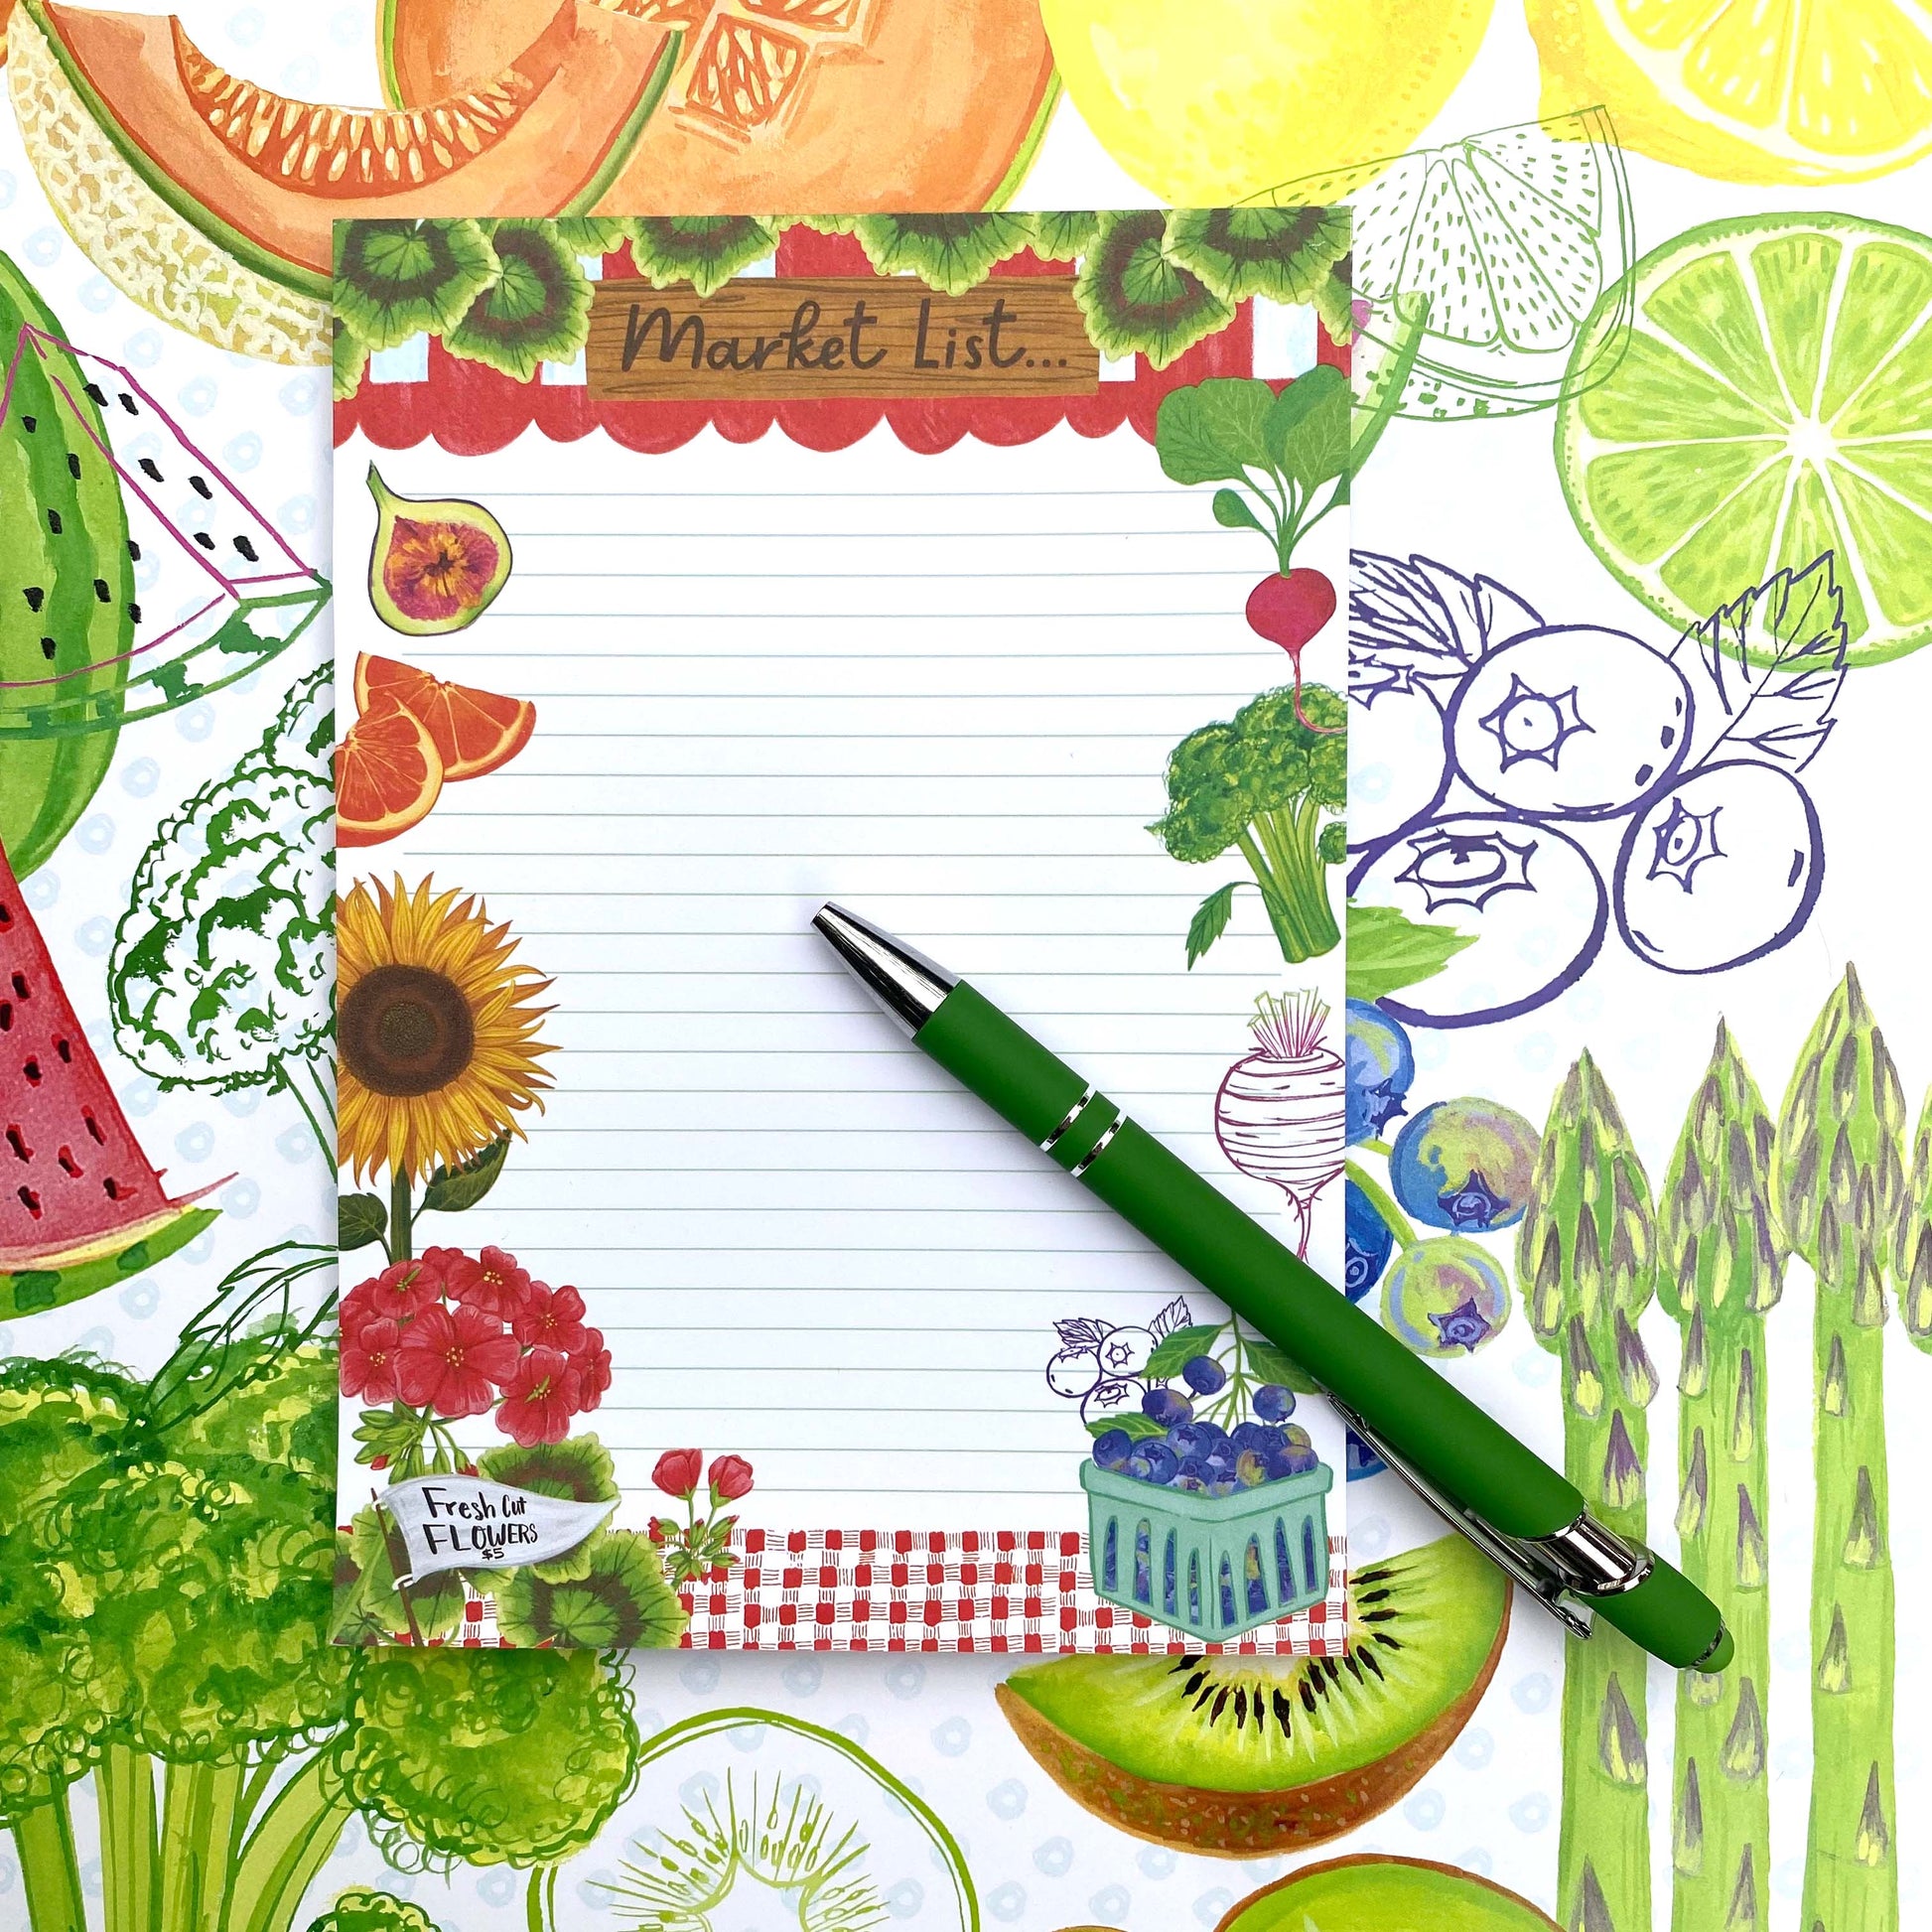 White background with colorful fruits and vegetables. A Market List Notepad sits on top of this illustration containing illustrations of fruits, vegetables and flowers. A green pen sits on top of the notepad.